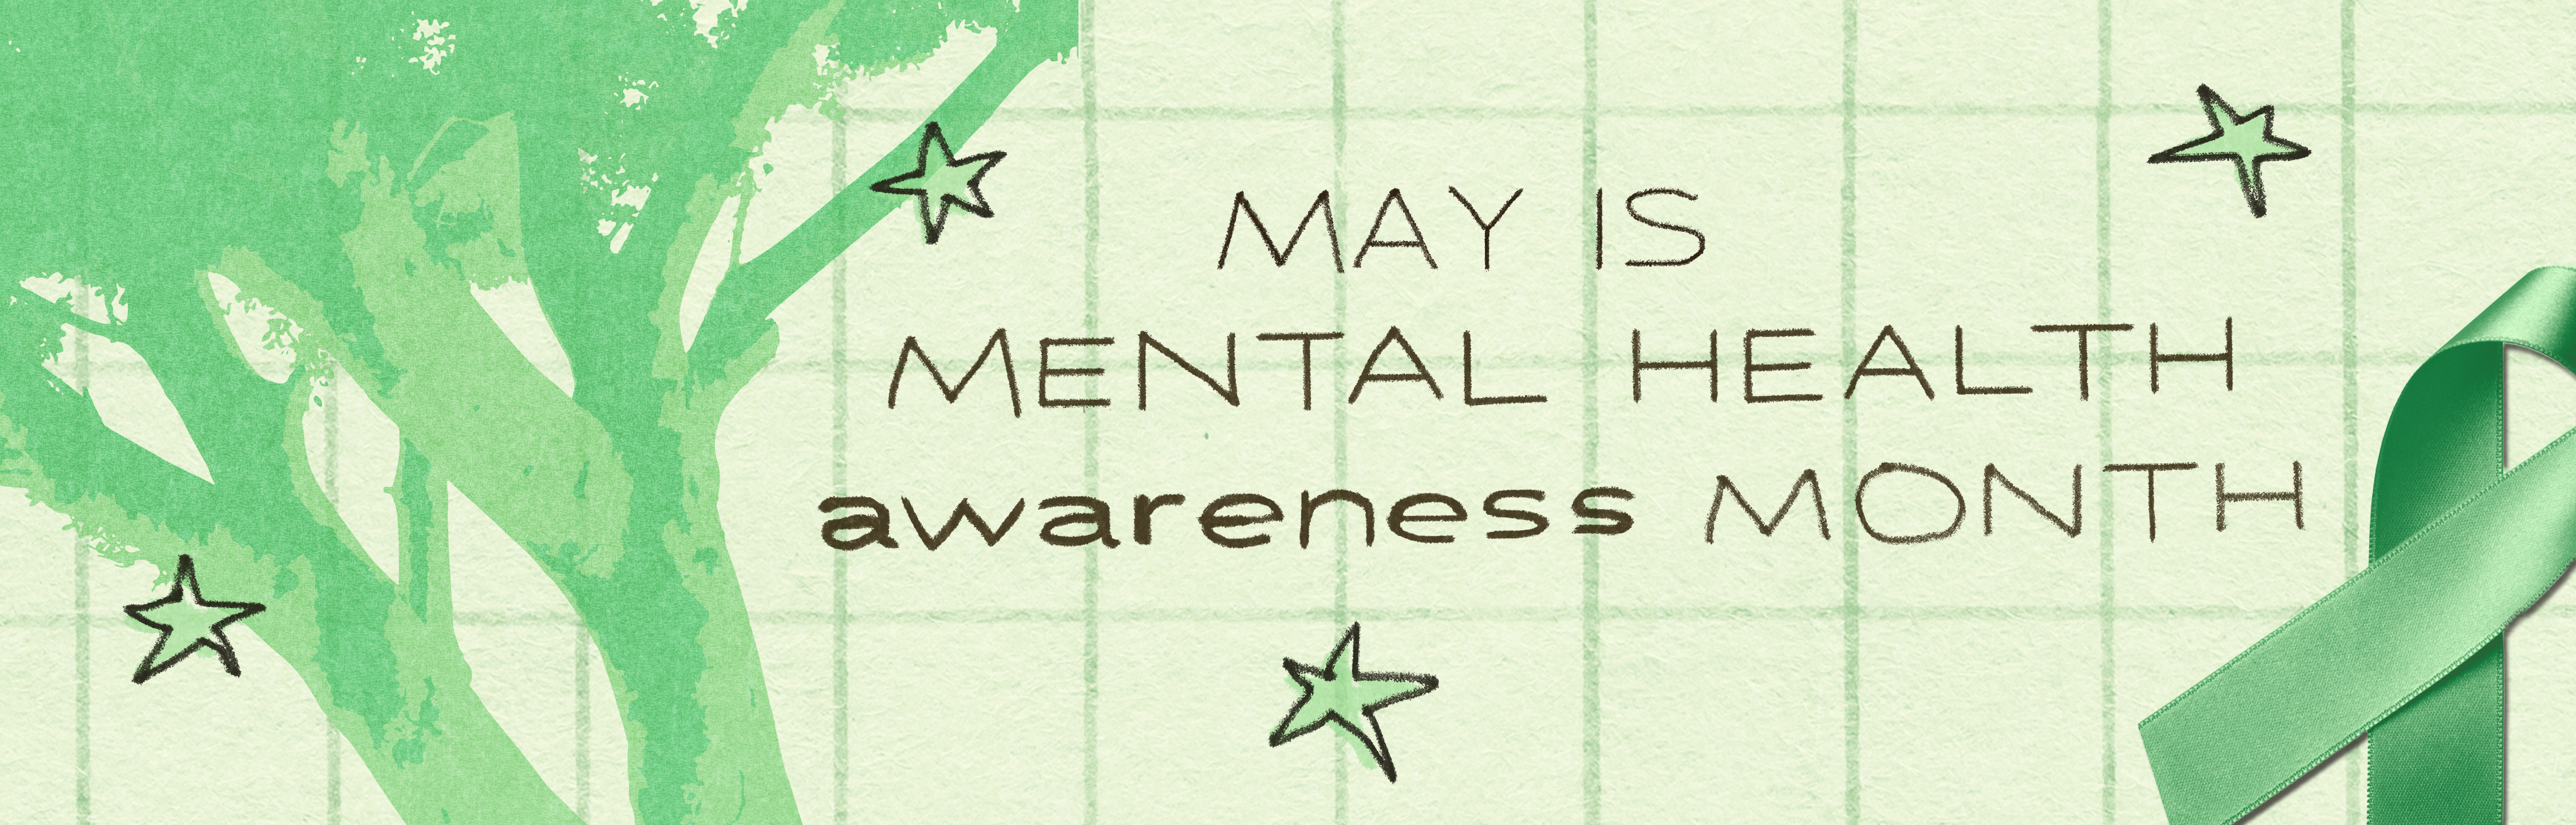 May is Mental Health Awareness month, with stars and hand drawn letters, a realistic green ribbon on the right hand side